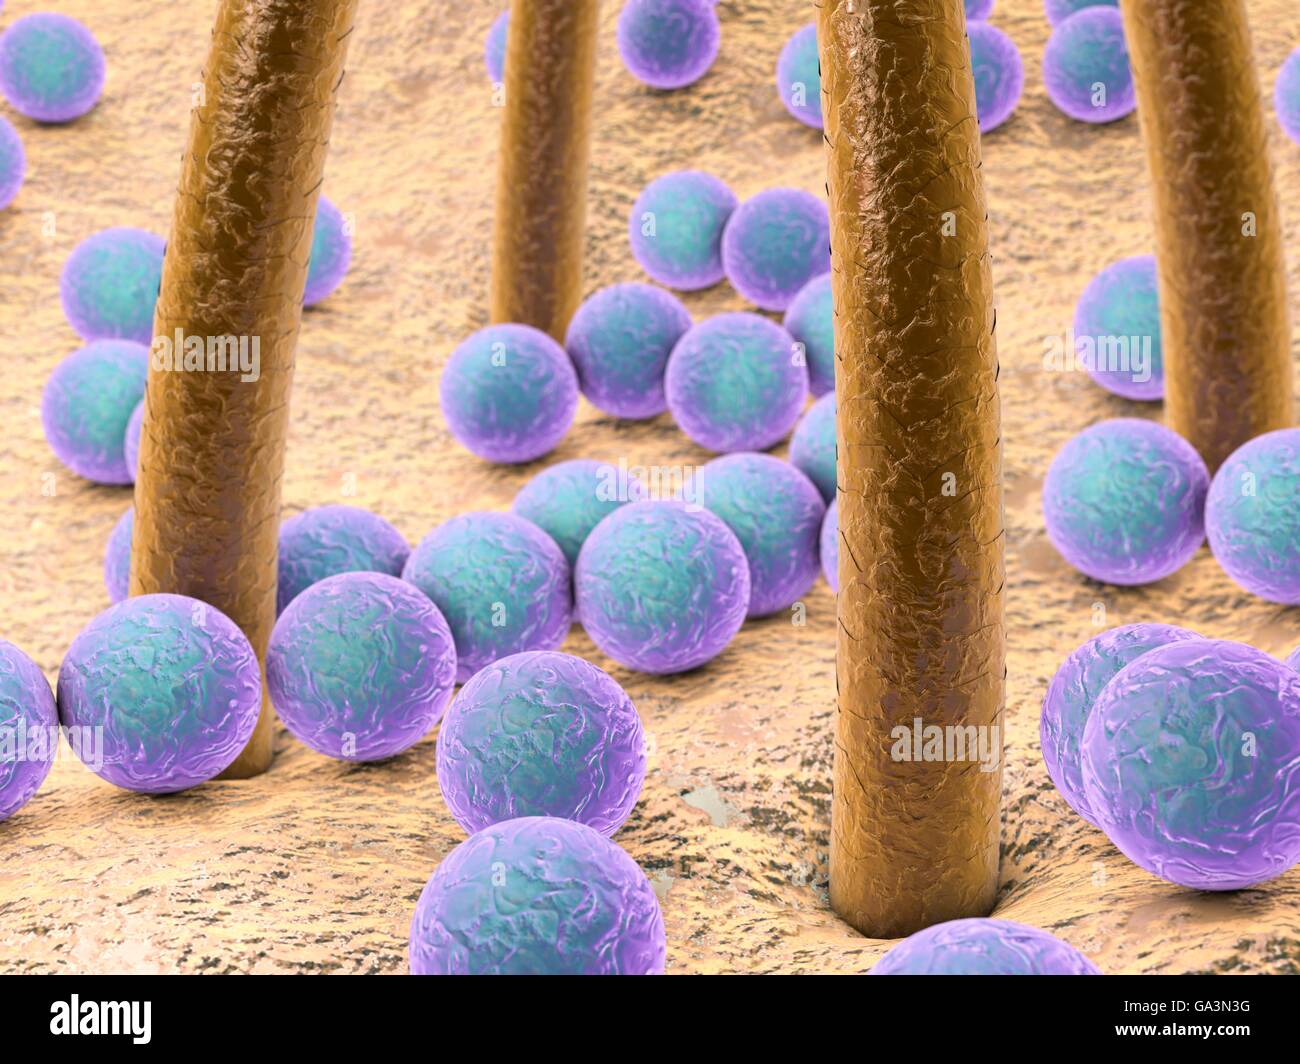 Bacteria on skin with hairs. Computer artwork of bacteria (blue) on human skin. Many types of bacteria are found on human skin, especially associated with sweat glands and hair follicles. They usually cause no problems, although some can cause acne. Bacteria usually only become a problem if they penetrate the skin, for example through a wound or cut. Stock Photo